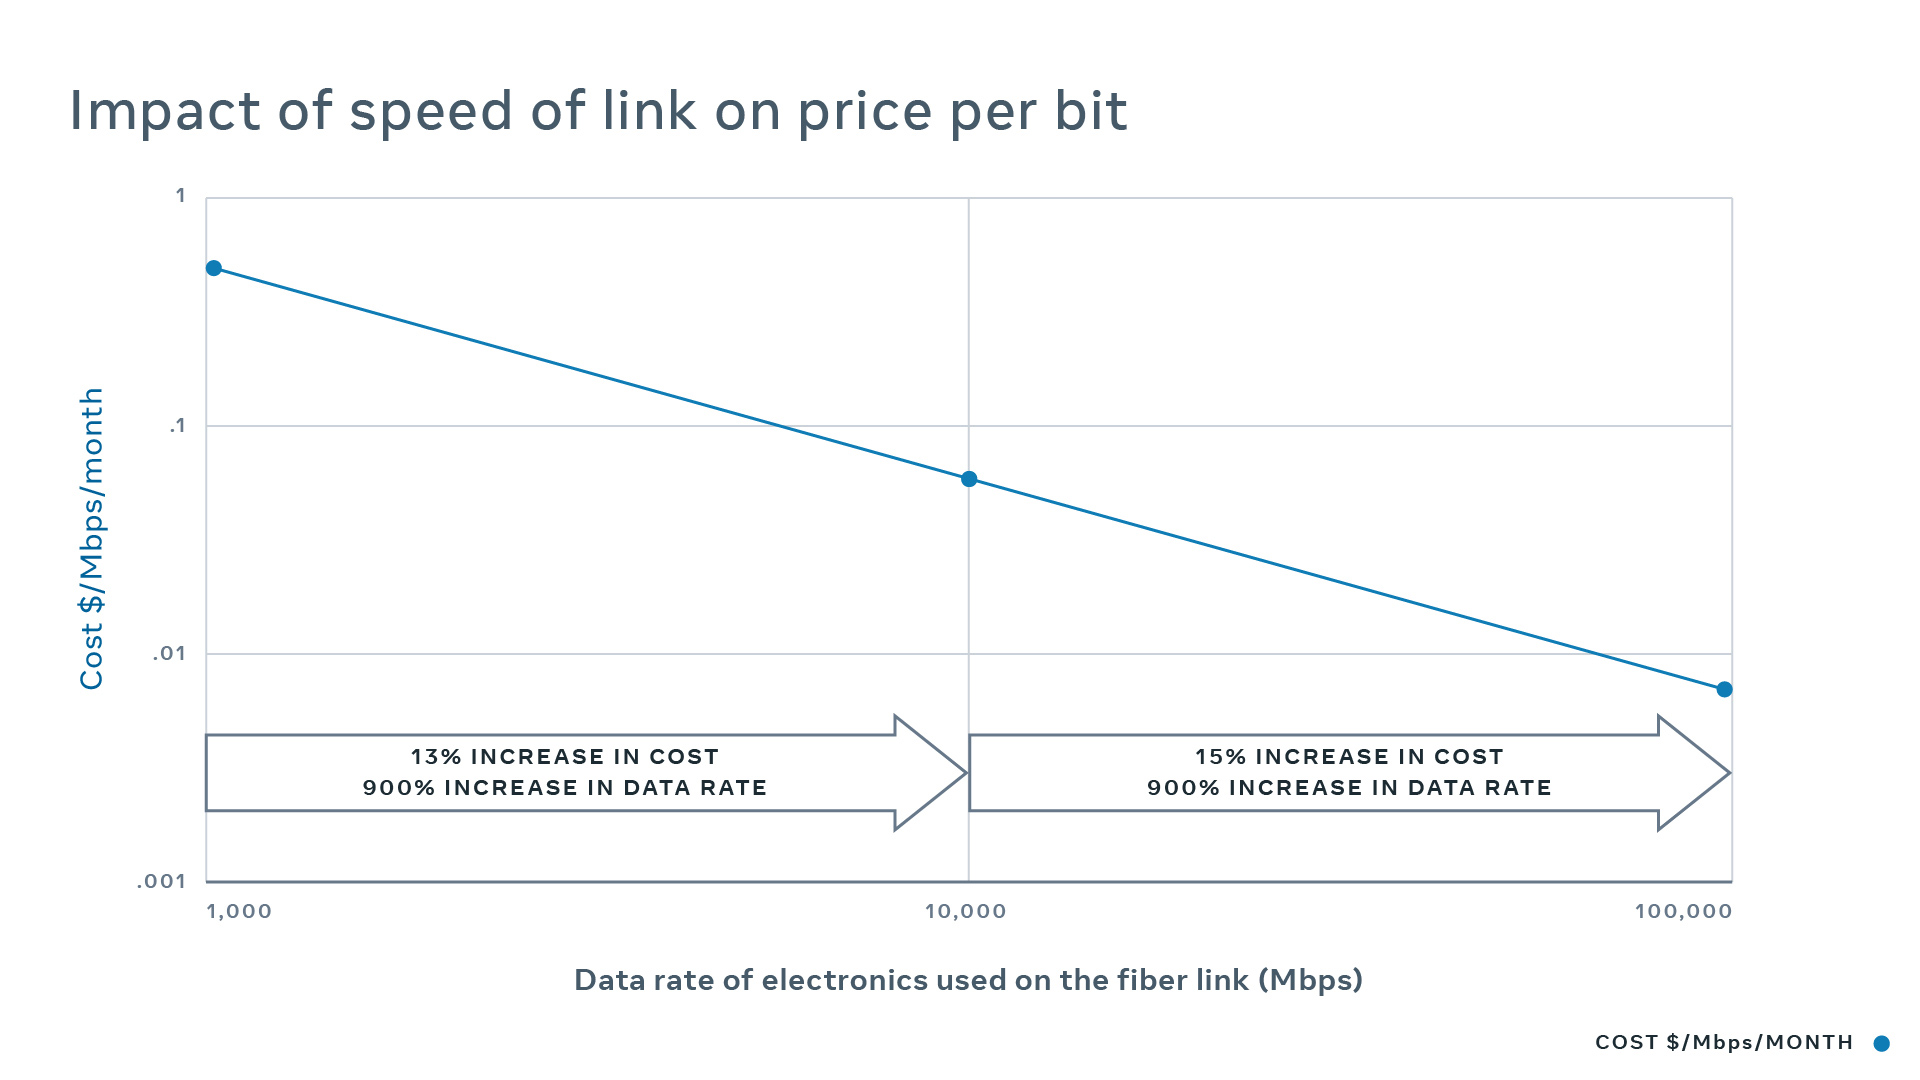 Aerial fiber deployment: Chart shows how the price of a unit of data capacity falls as the speed of the link is increased due to the cost increasing by a smaller rate than the corresponding speed increase